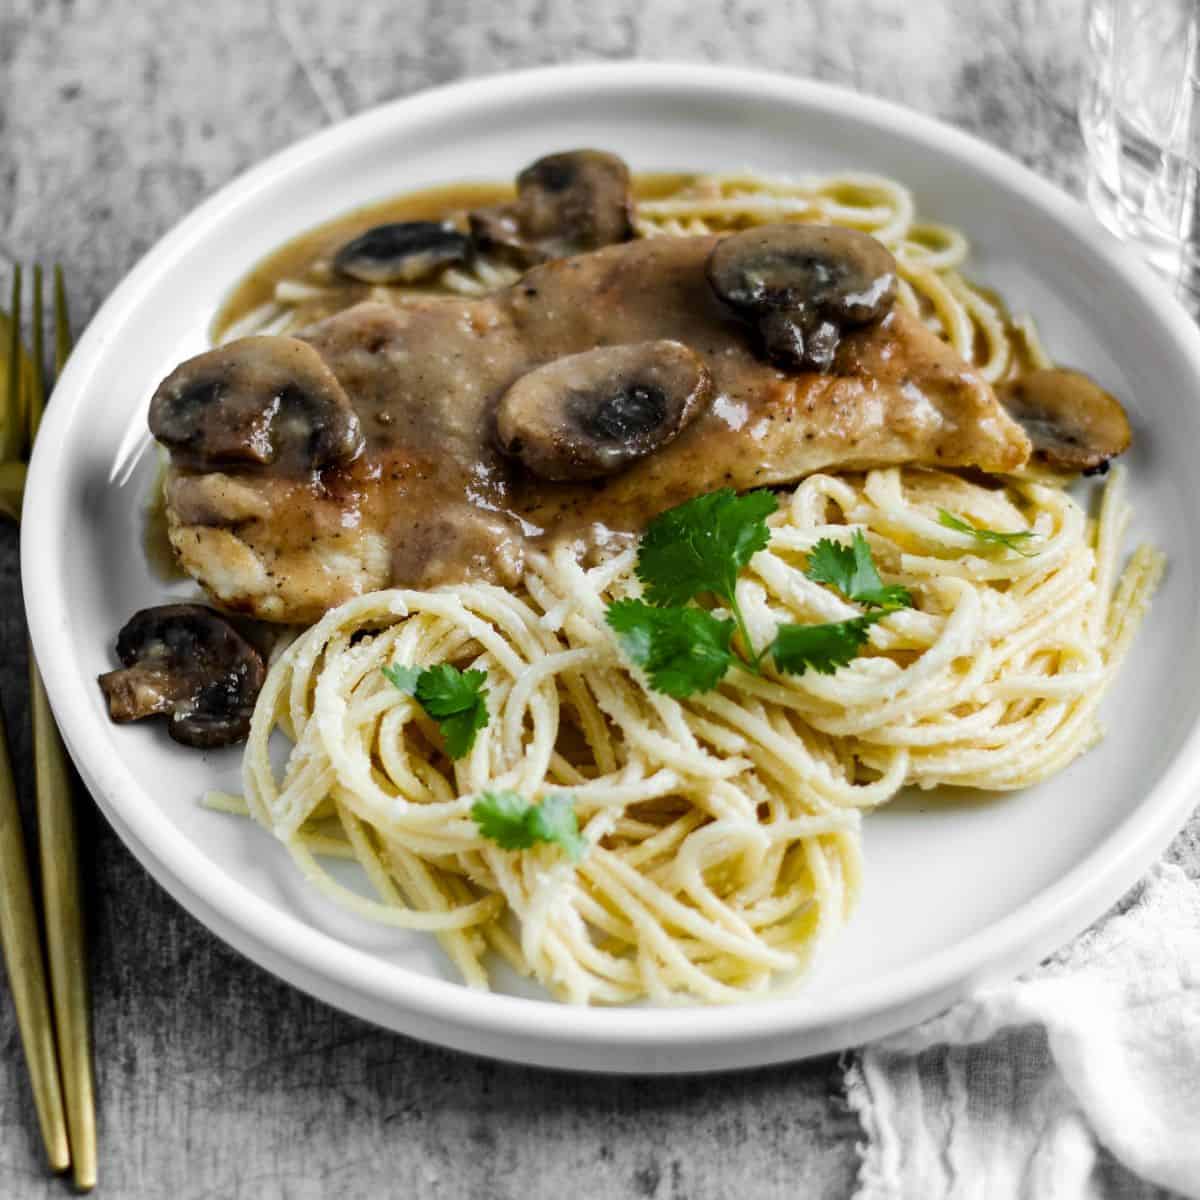 Finish dish of chicken marsala in a plate with pasta.